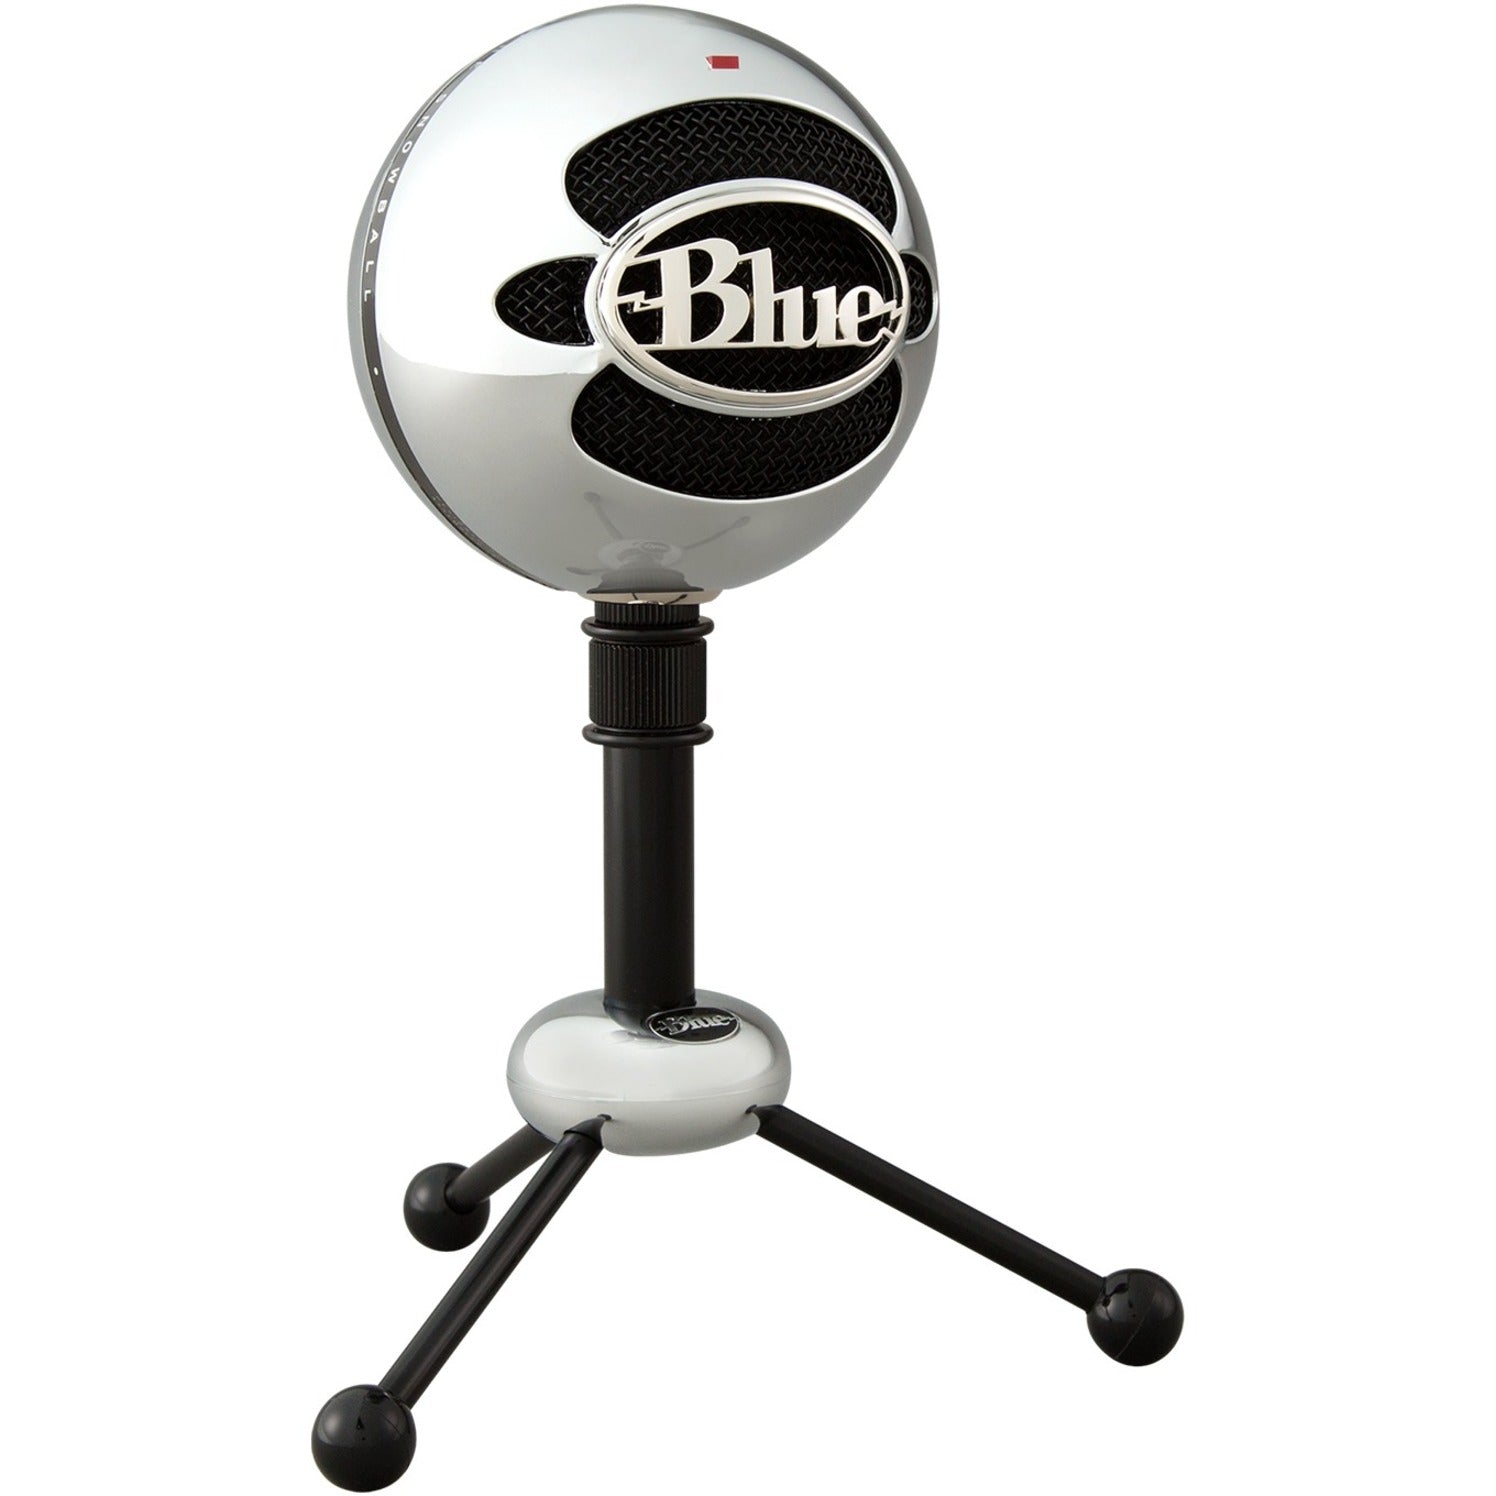 Blue 988-000068 Snowball Classic Studio-Quality USB Microphone, 2 Year Limited Warranty, Cardioid & Omni-directional Polar Pattern, Stand Mountable, Condenser Technology [Discontinued]